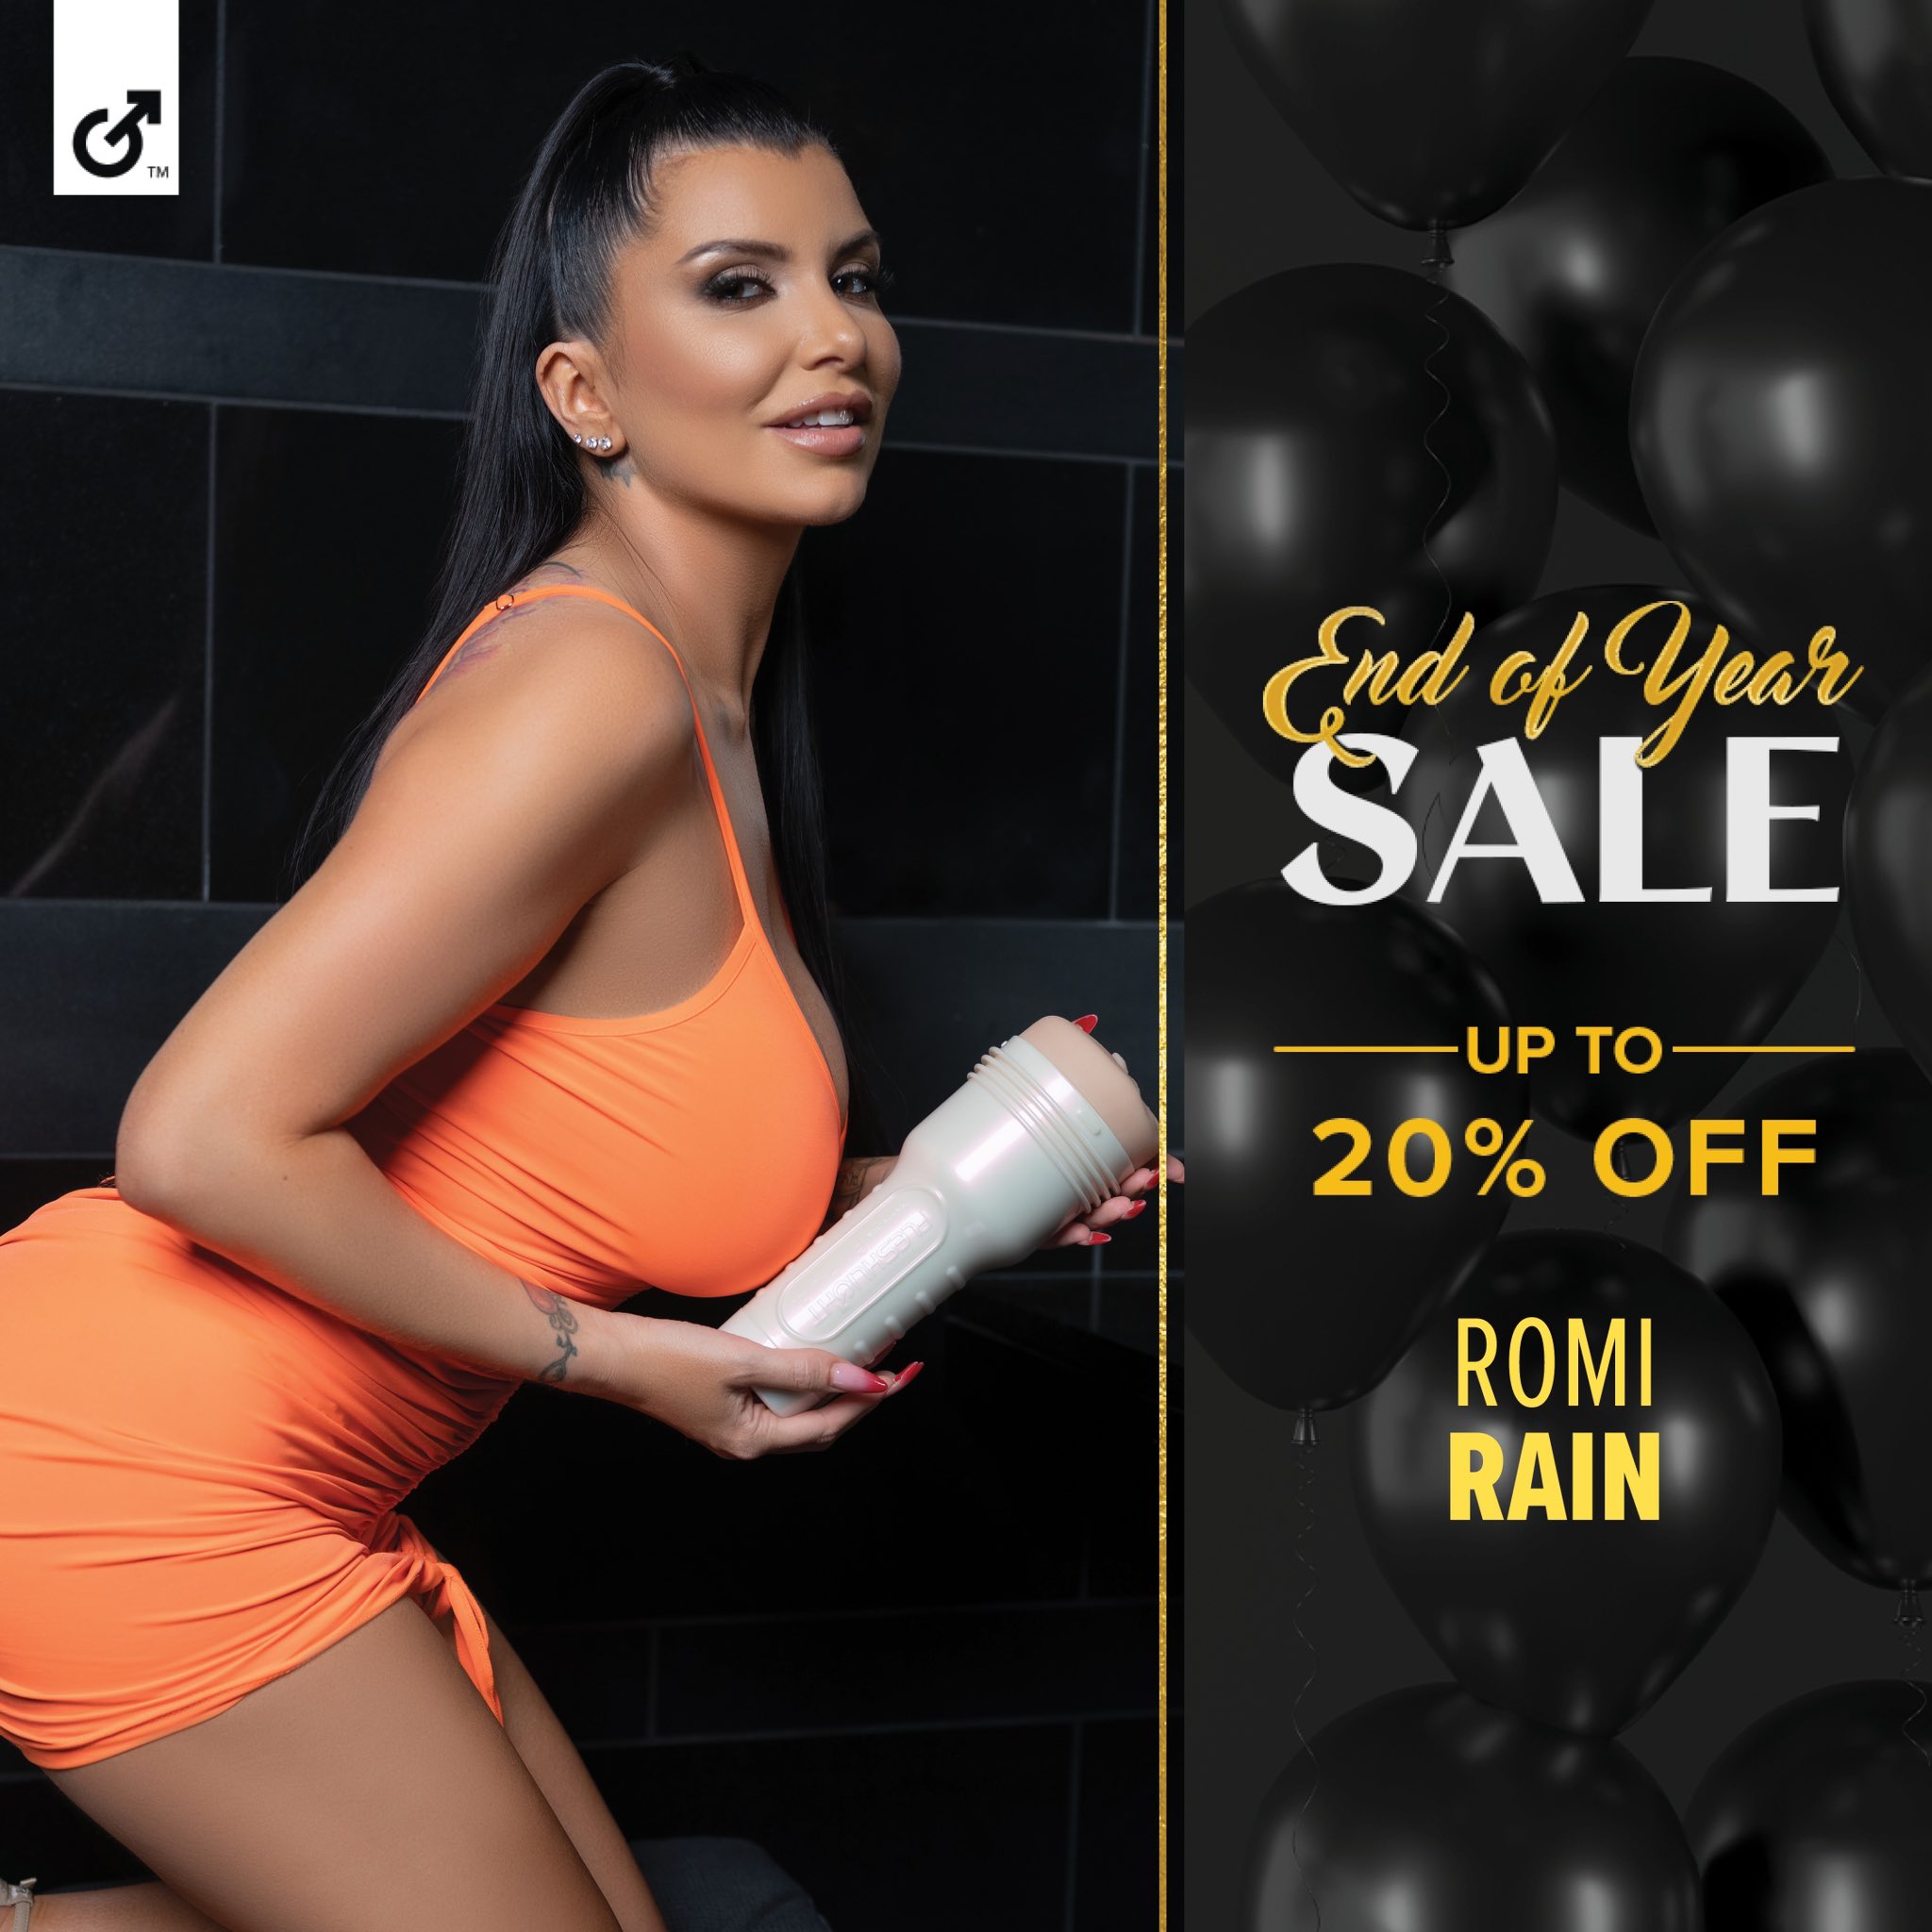 Romi Rain ® on X: Use code NEWYEAR23 for up to 20% off @Fleshlight  products! Pick mine up at t.coYC77cLfh2L 💋  t.colq7iIxMMKM  X